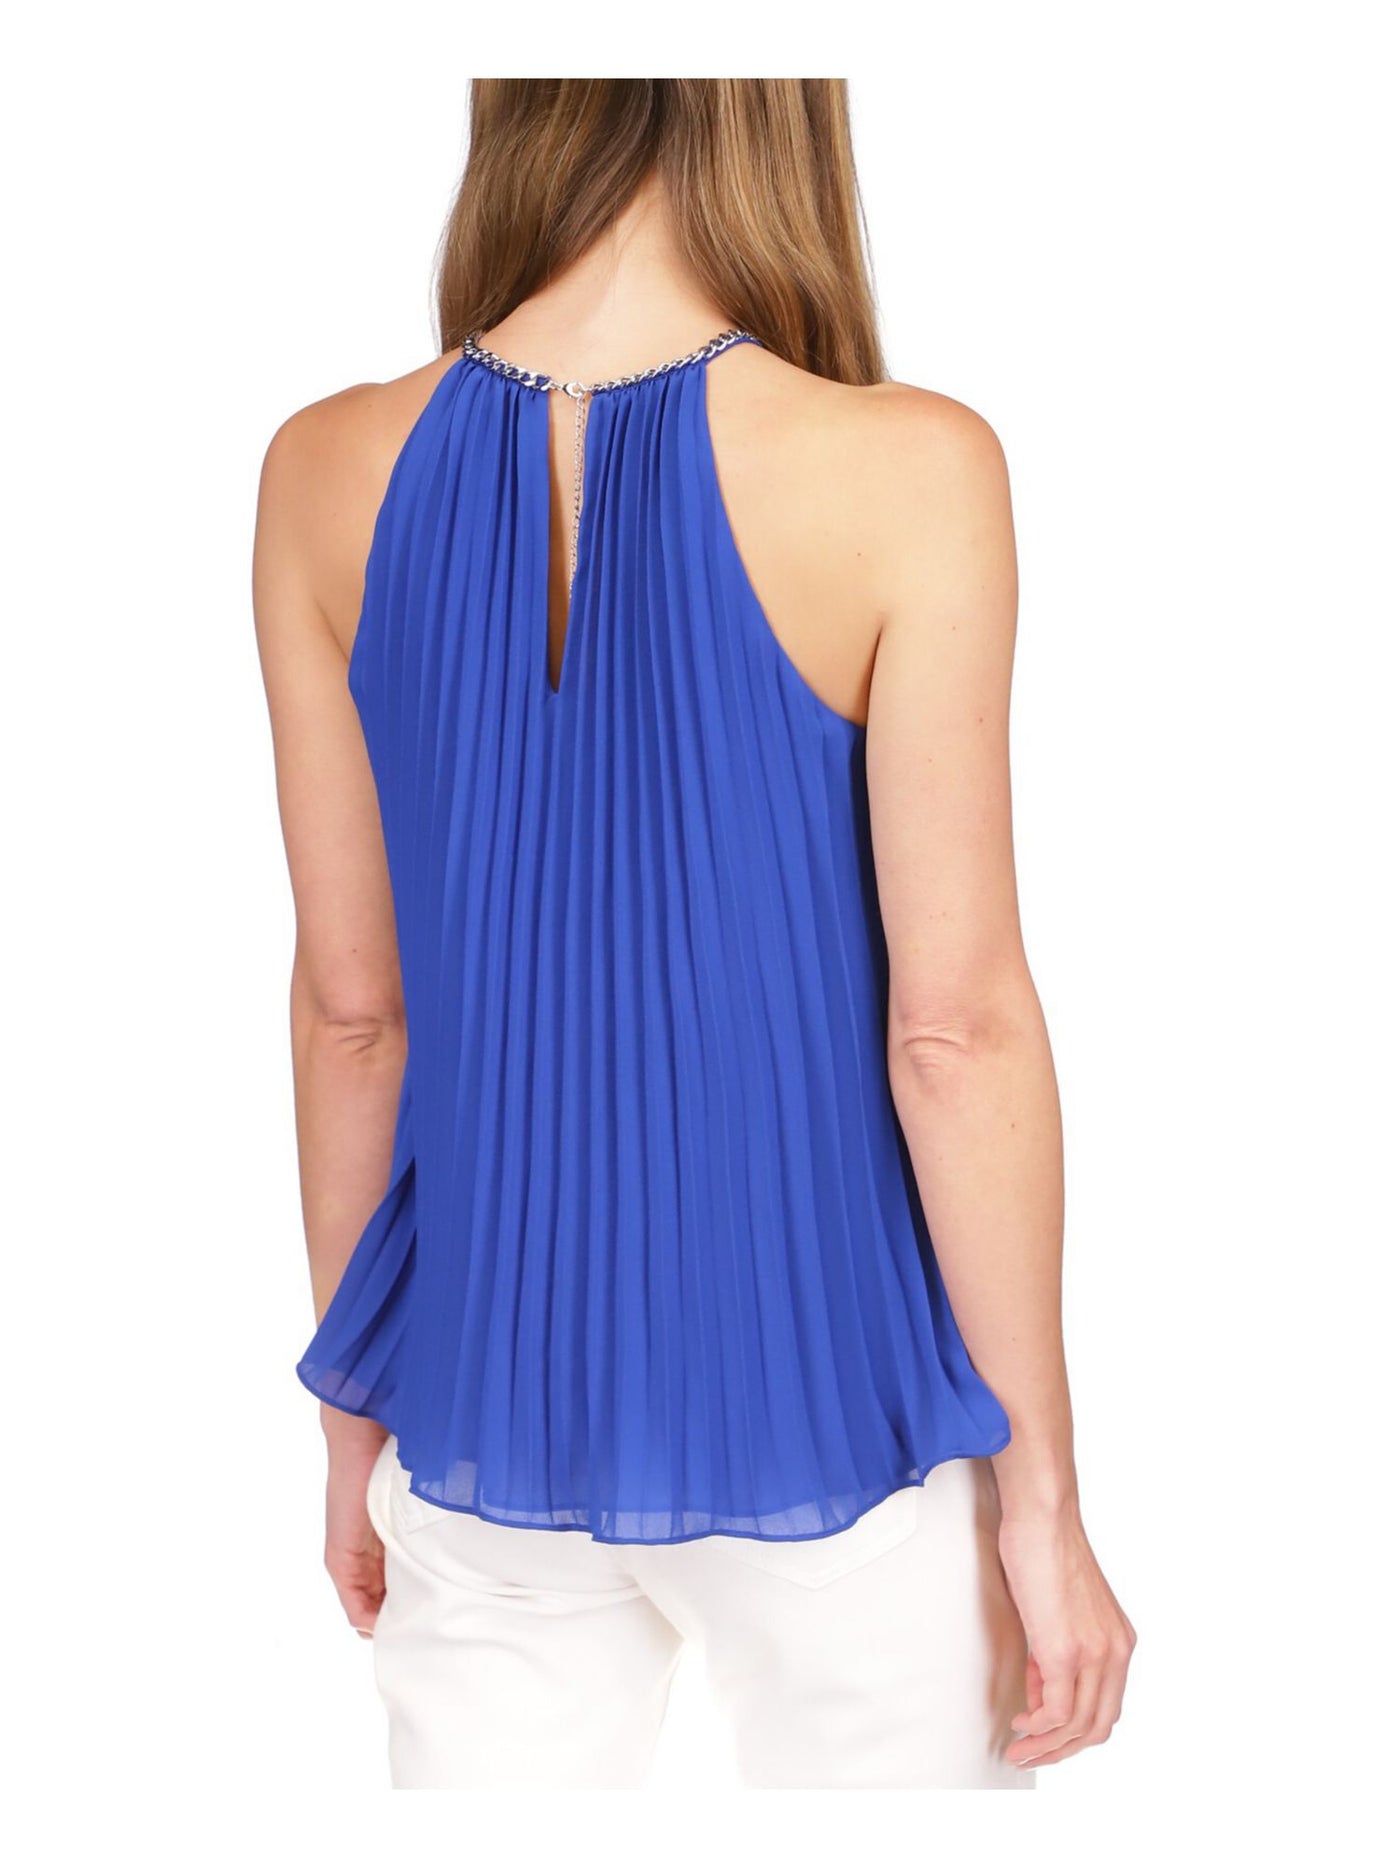 MICHAEL MICHAEL KORS Womens Blue Pleated Lined Chain Detail Sleeveless Halter Top S